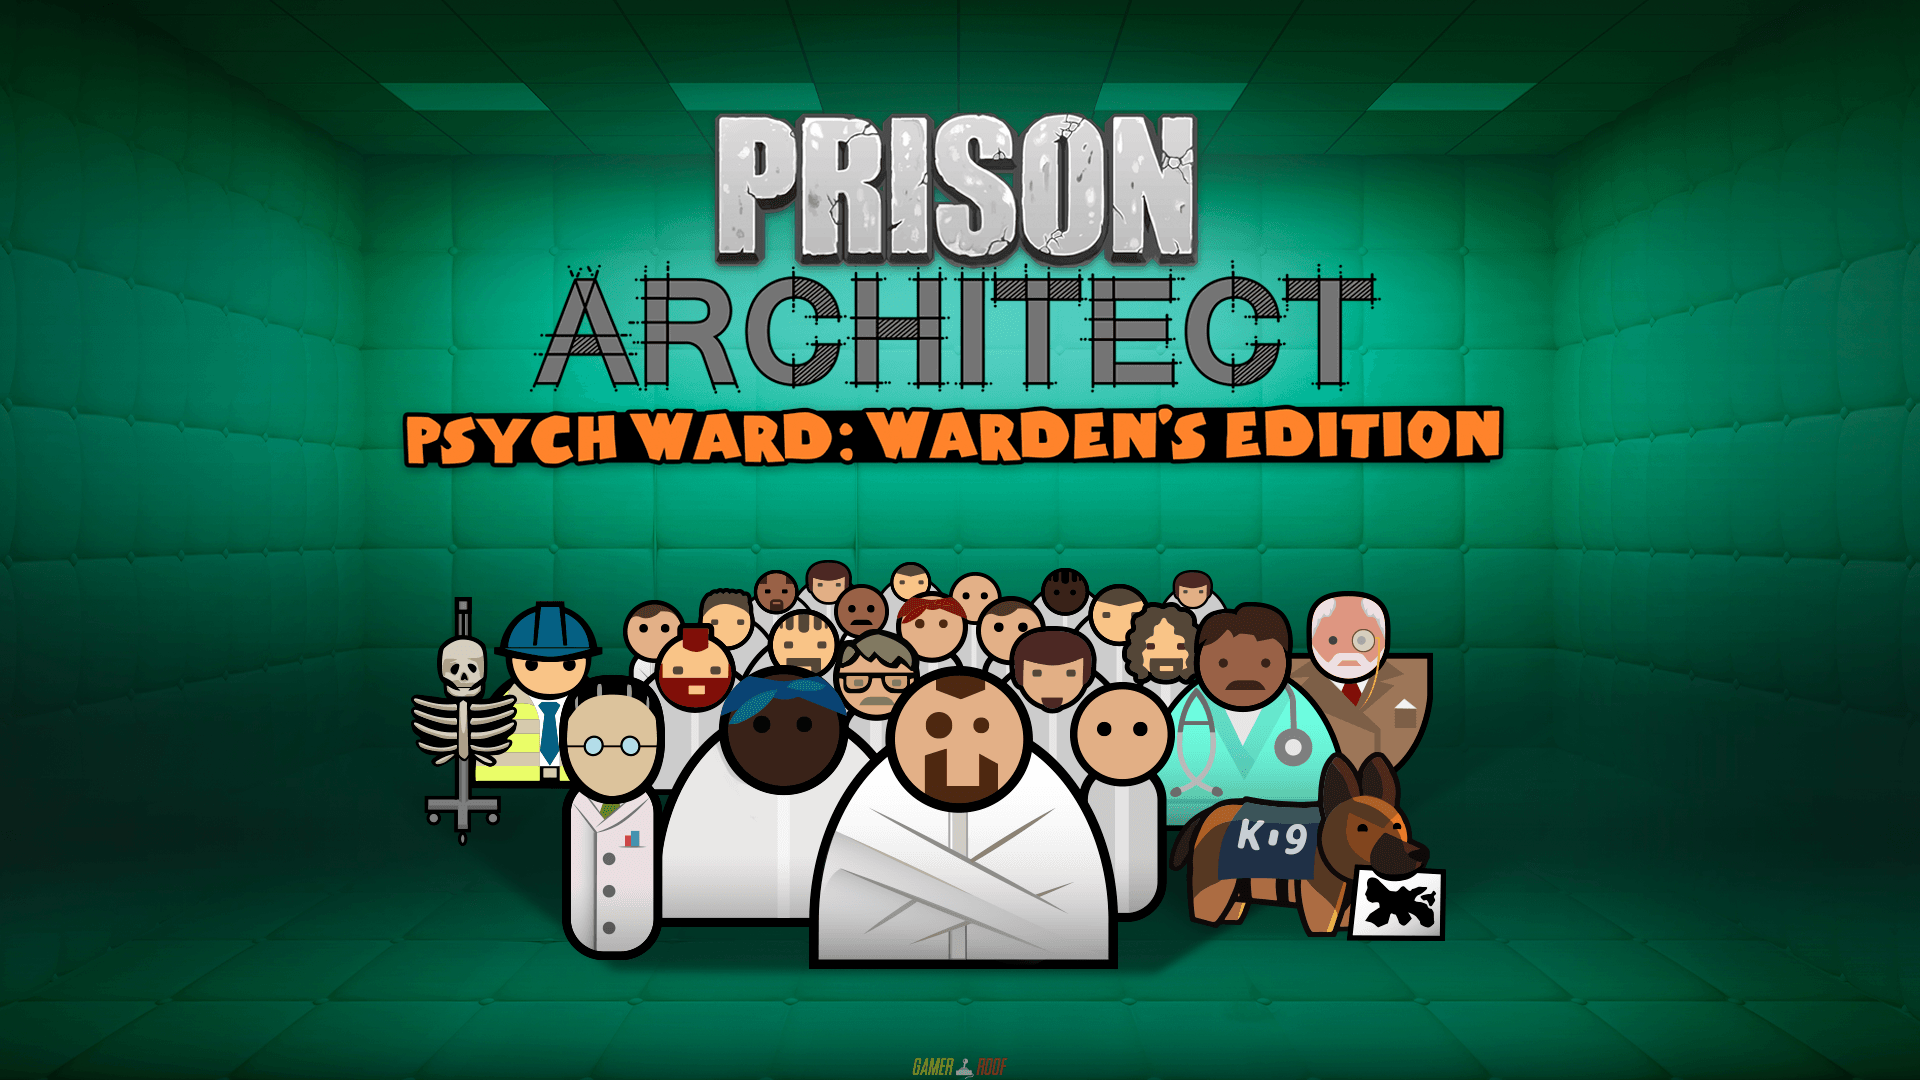 Prison Architect Psych Ward Warden's Edition Xbox One Version Full Game Free Download